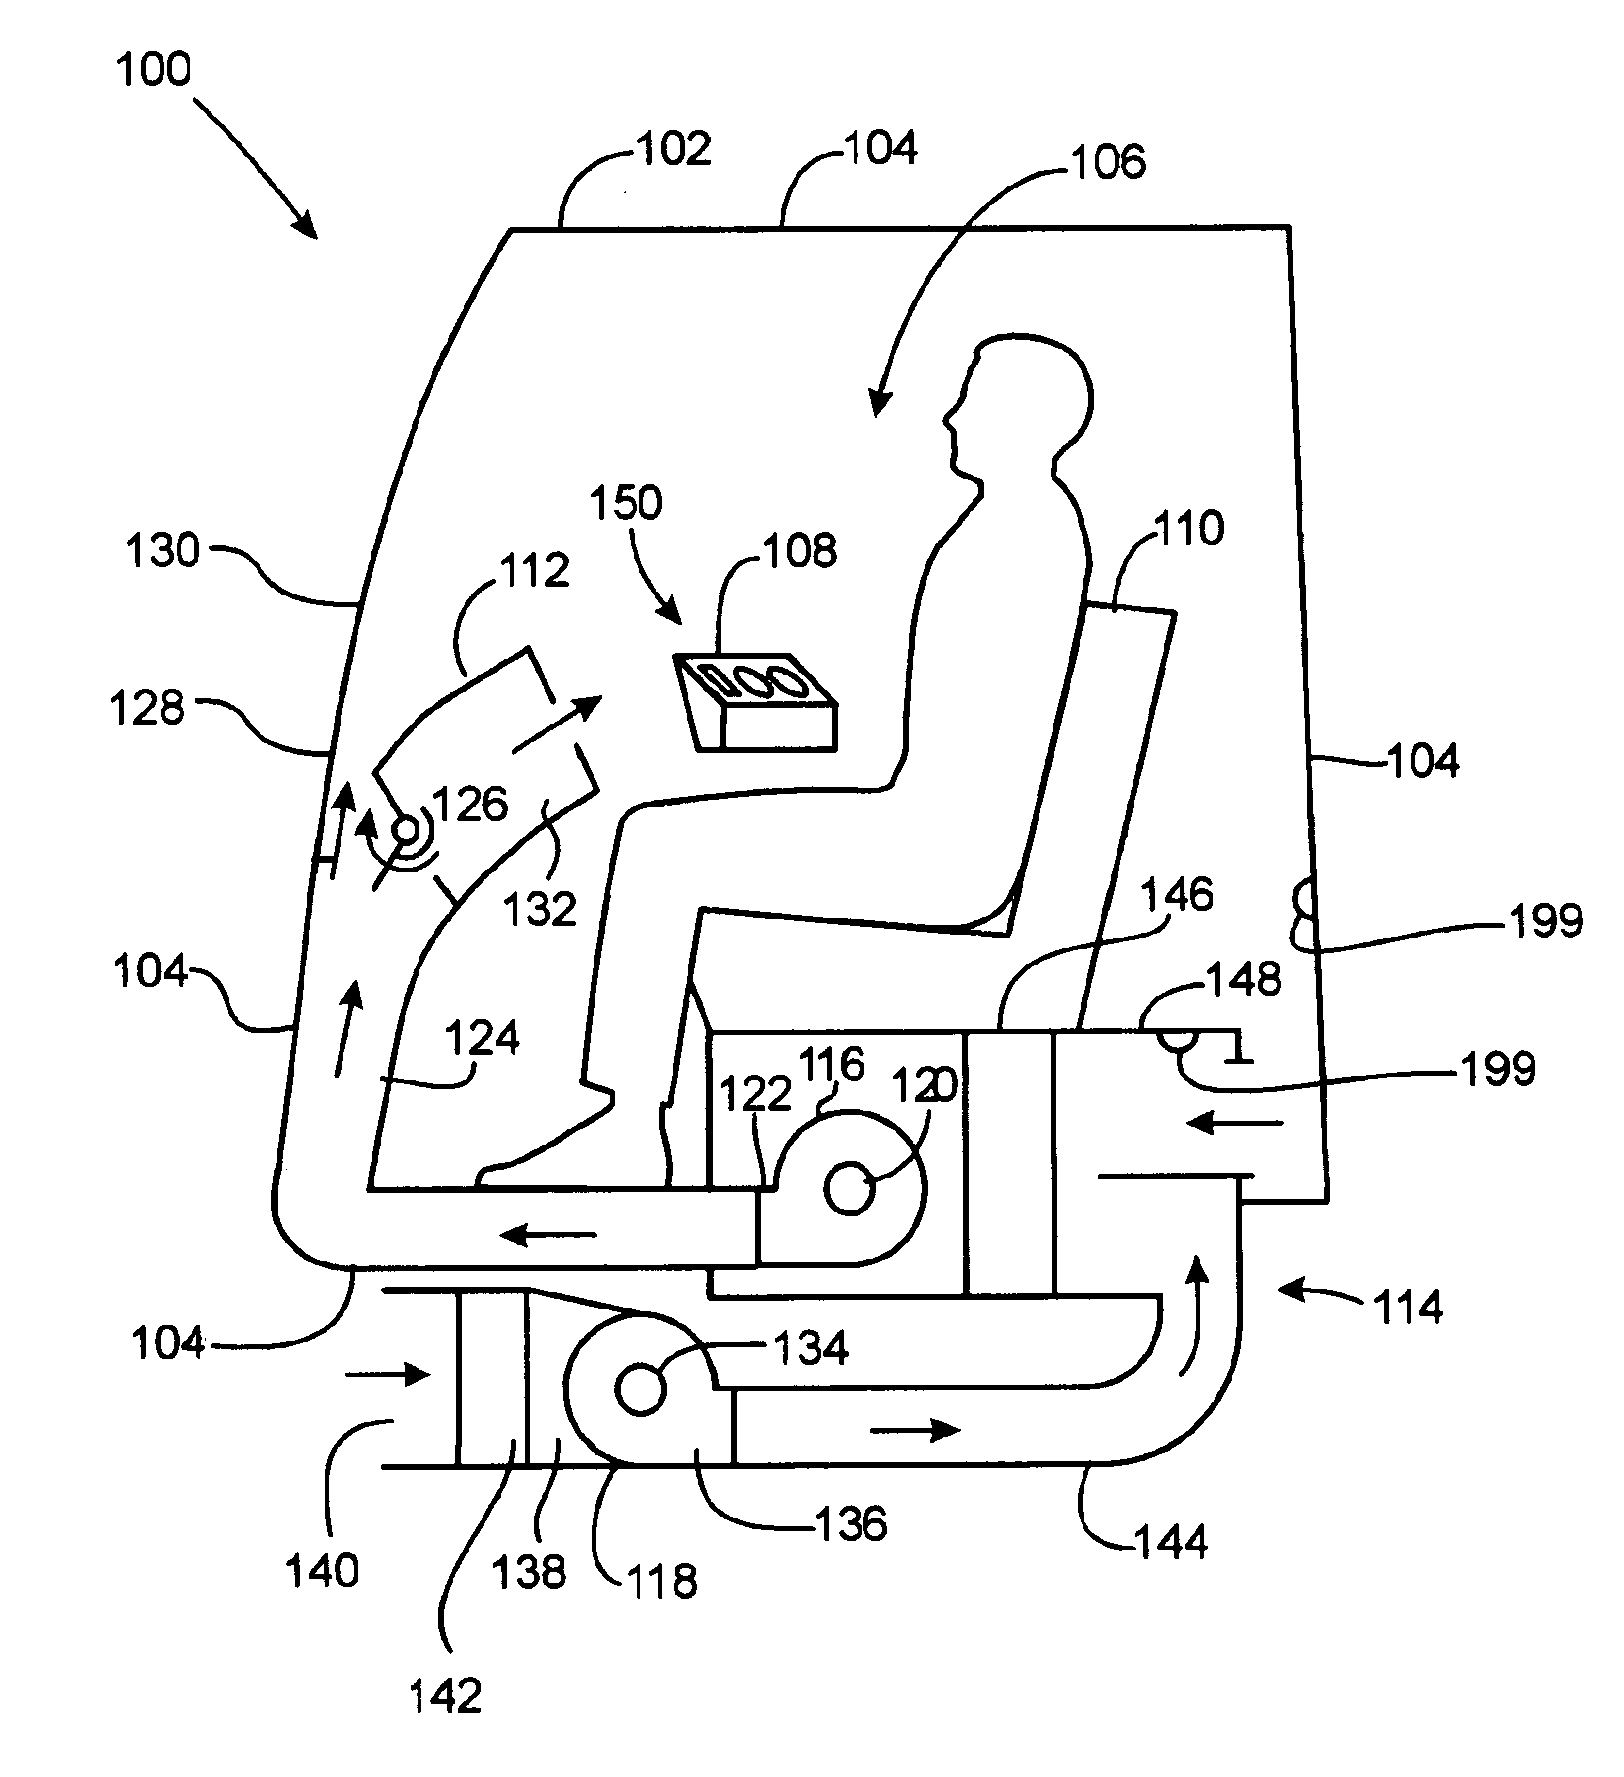 HVAC system for a work vehicle